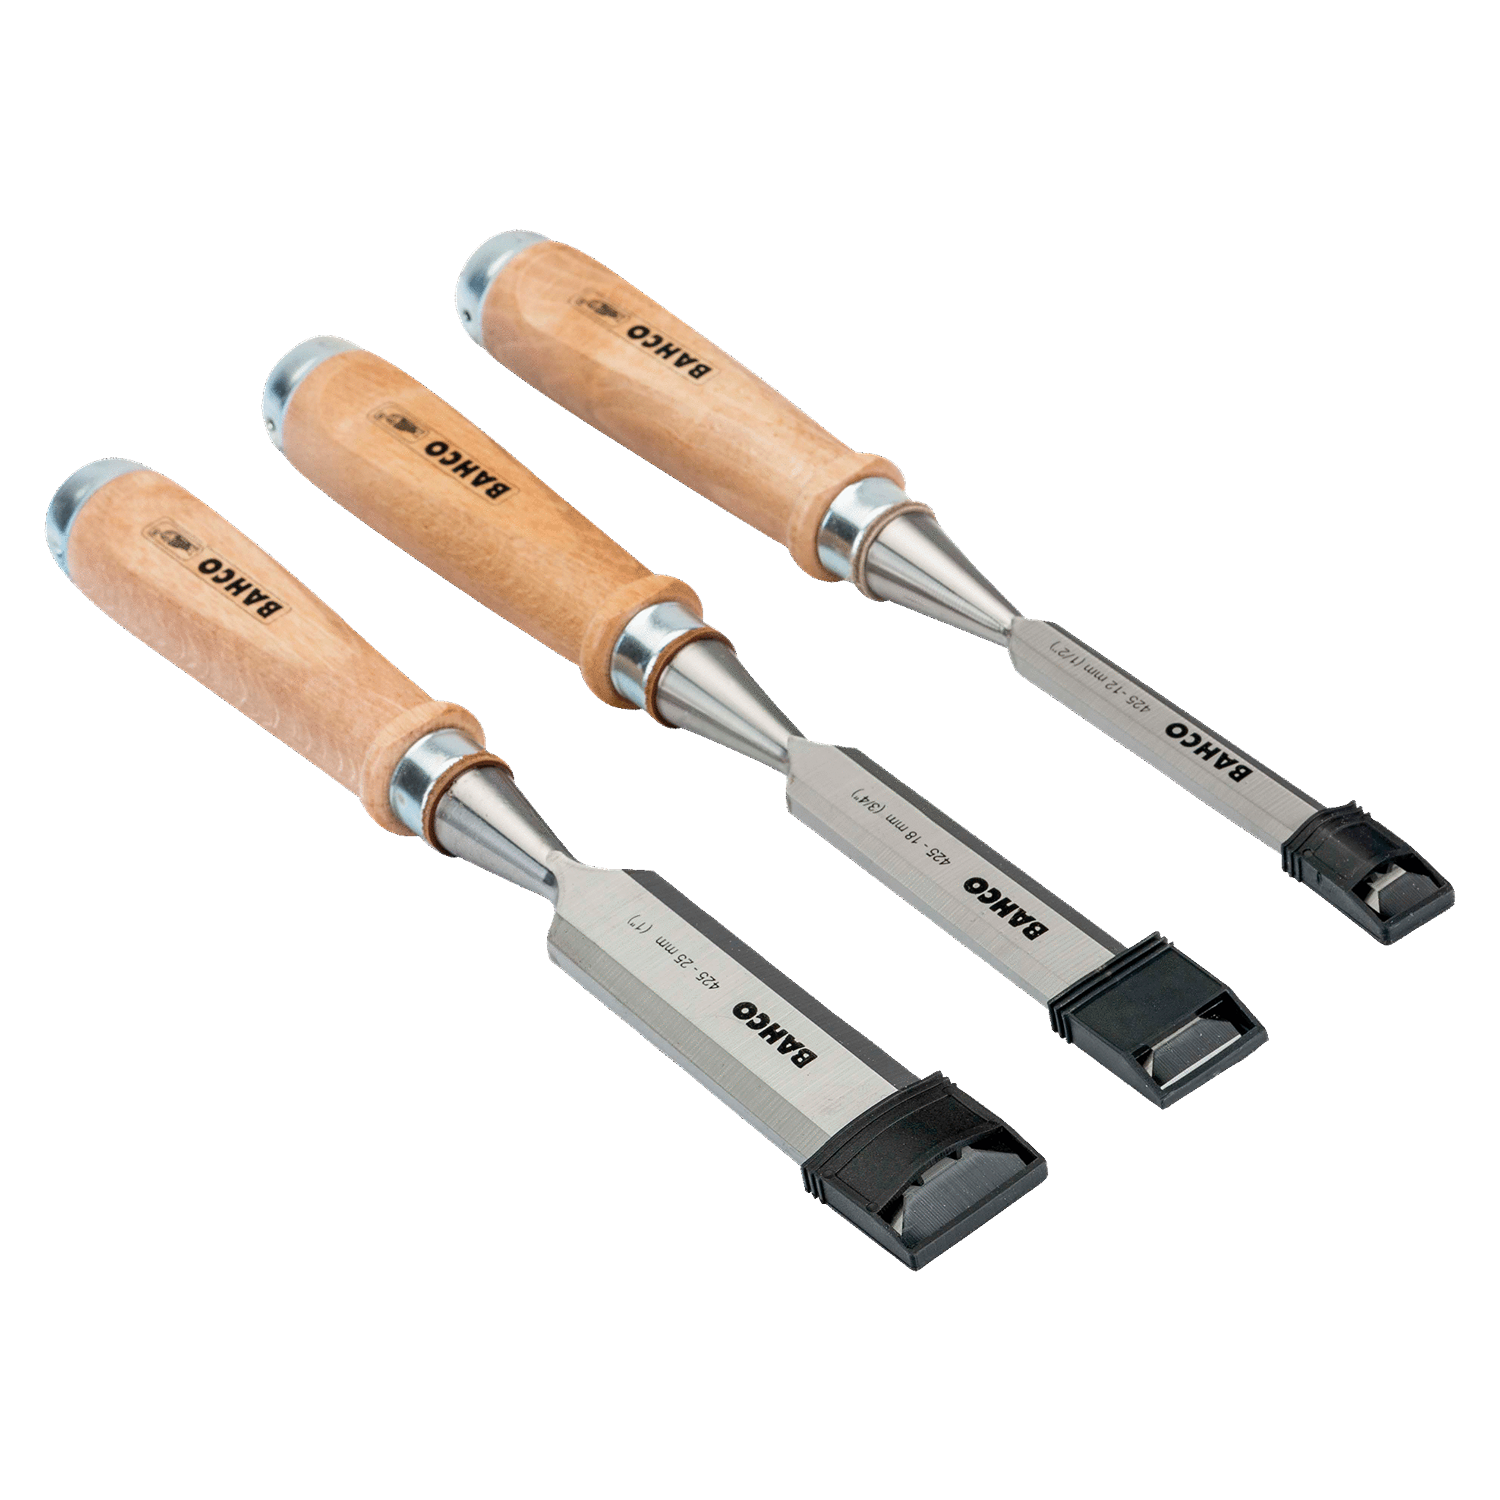 BAHCO 425-081 3 Pcs Wooden-Handle Chisel Set In Cardboard Box - Premium Chisel Set from BAHCO - Shop now at Yew Aik.